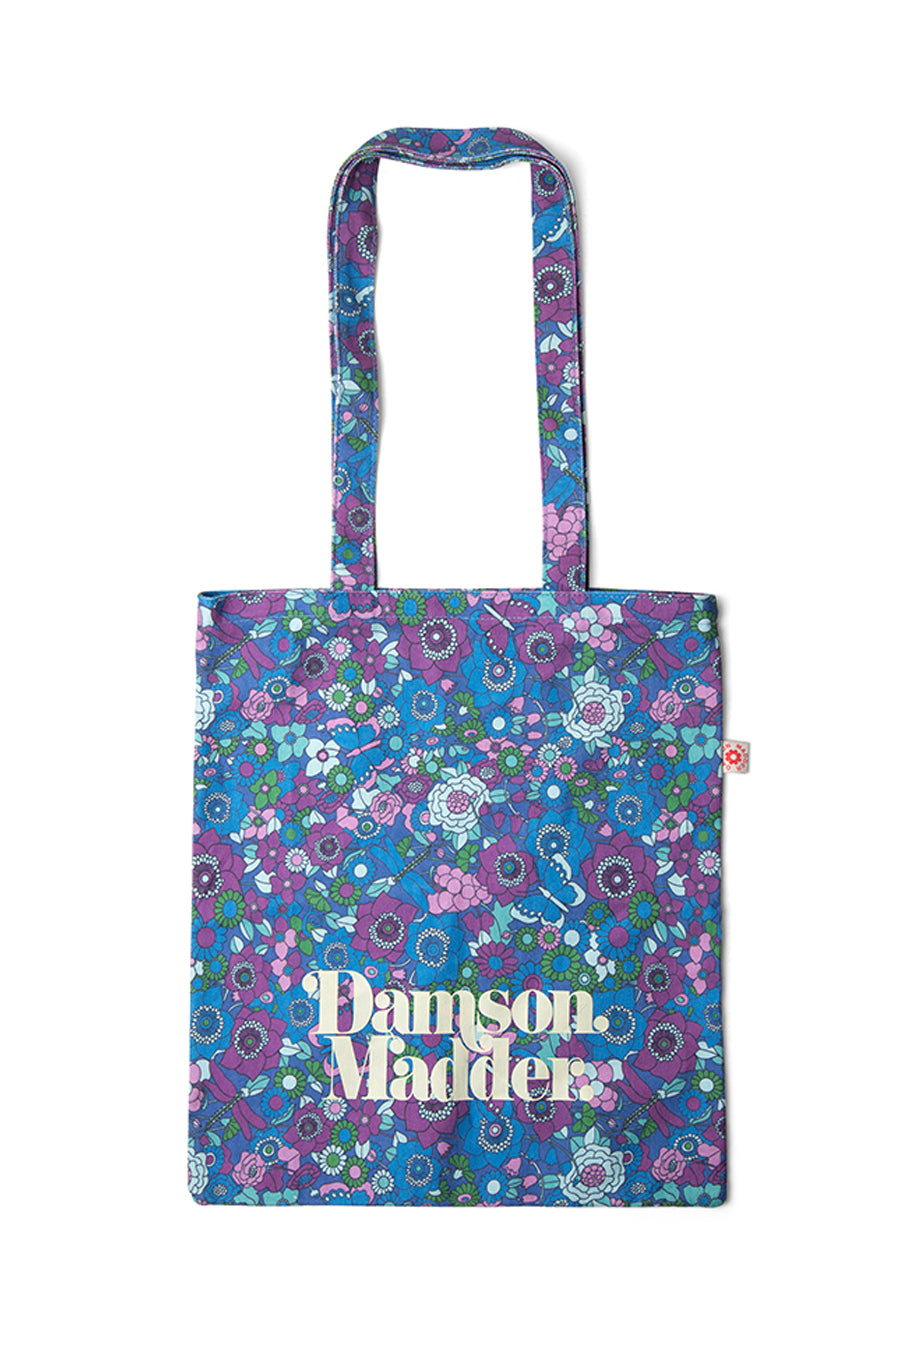 SMALL TOTE BAG IN BLUE FLORAL PRINT